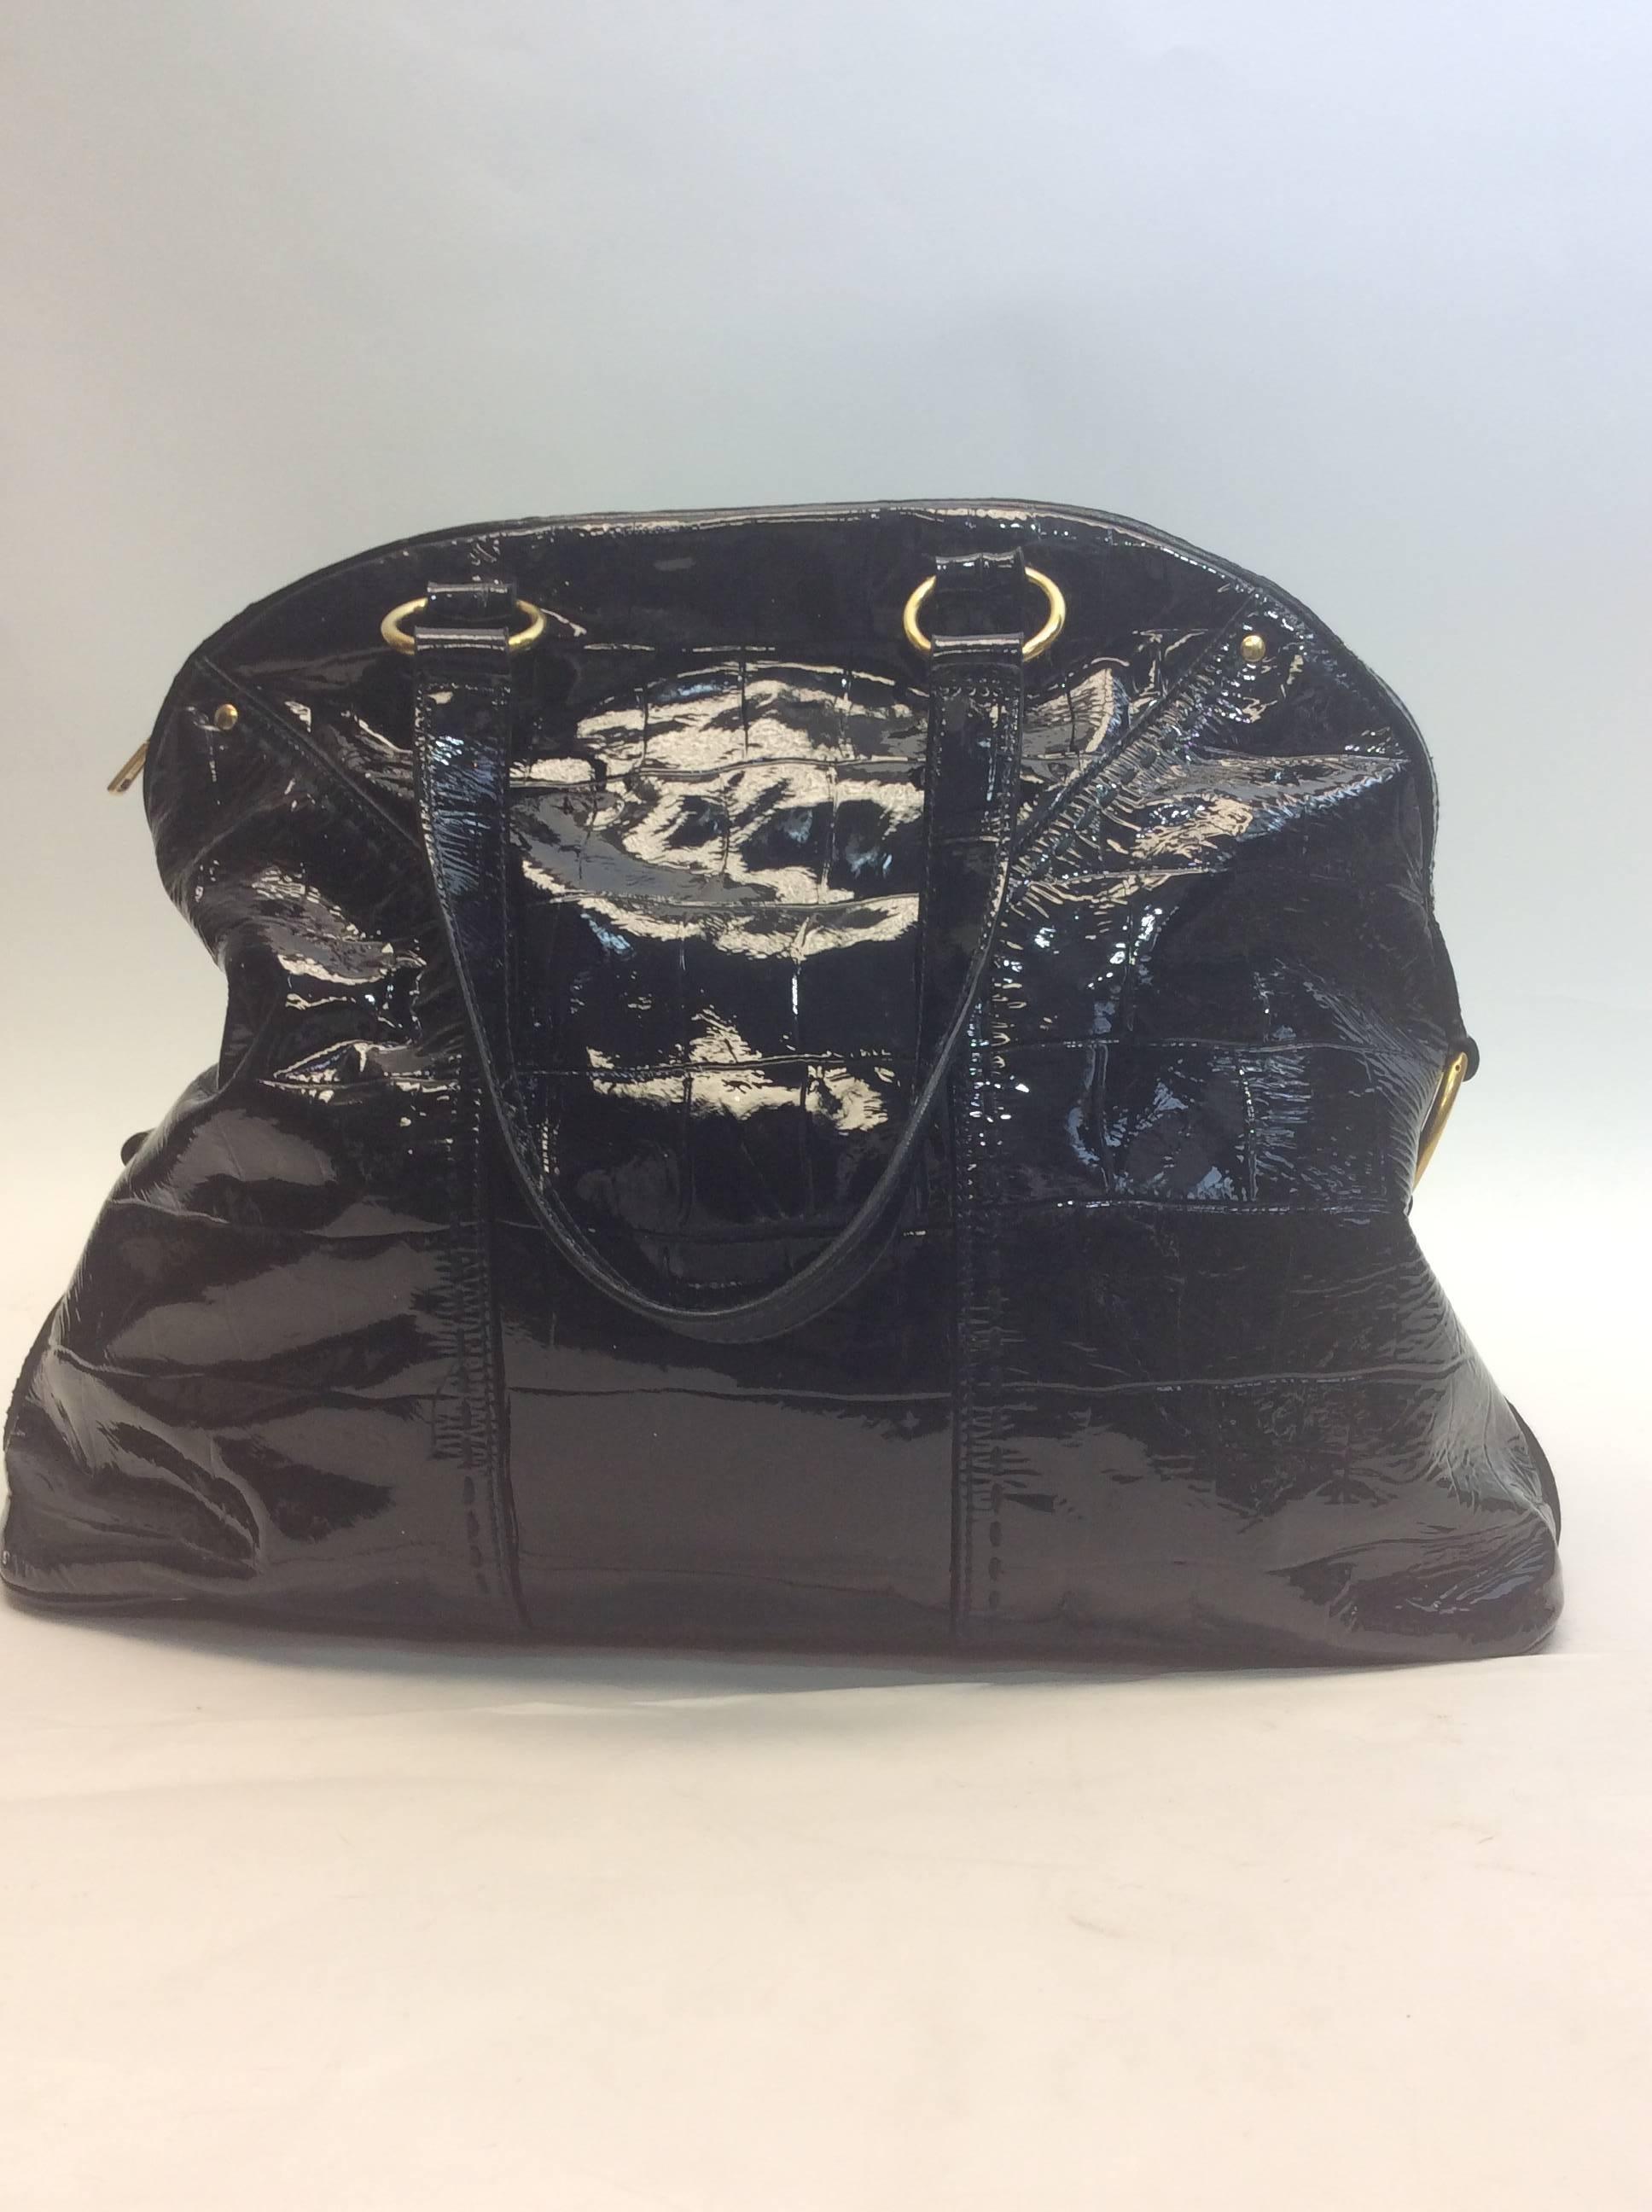 Yves Saint Laurent Black Patent Muse Bag In Good Condition For Sale In Narberth, PA